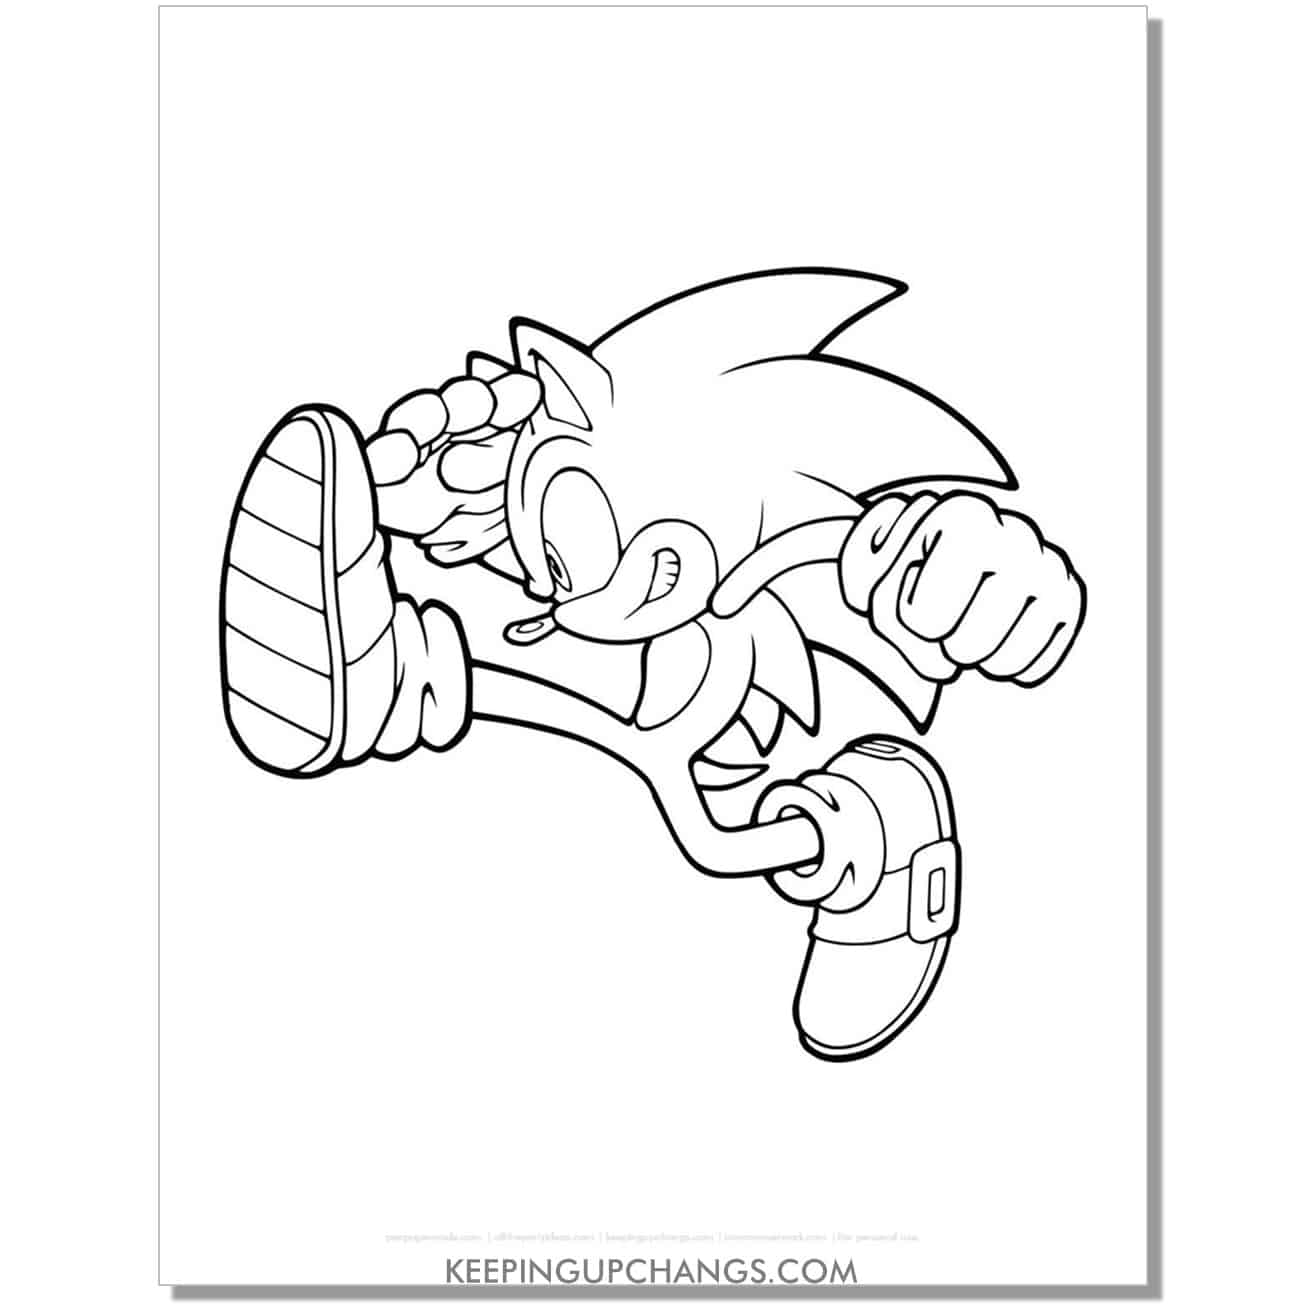 sonic doing split jump coloring page.